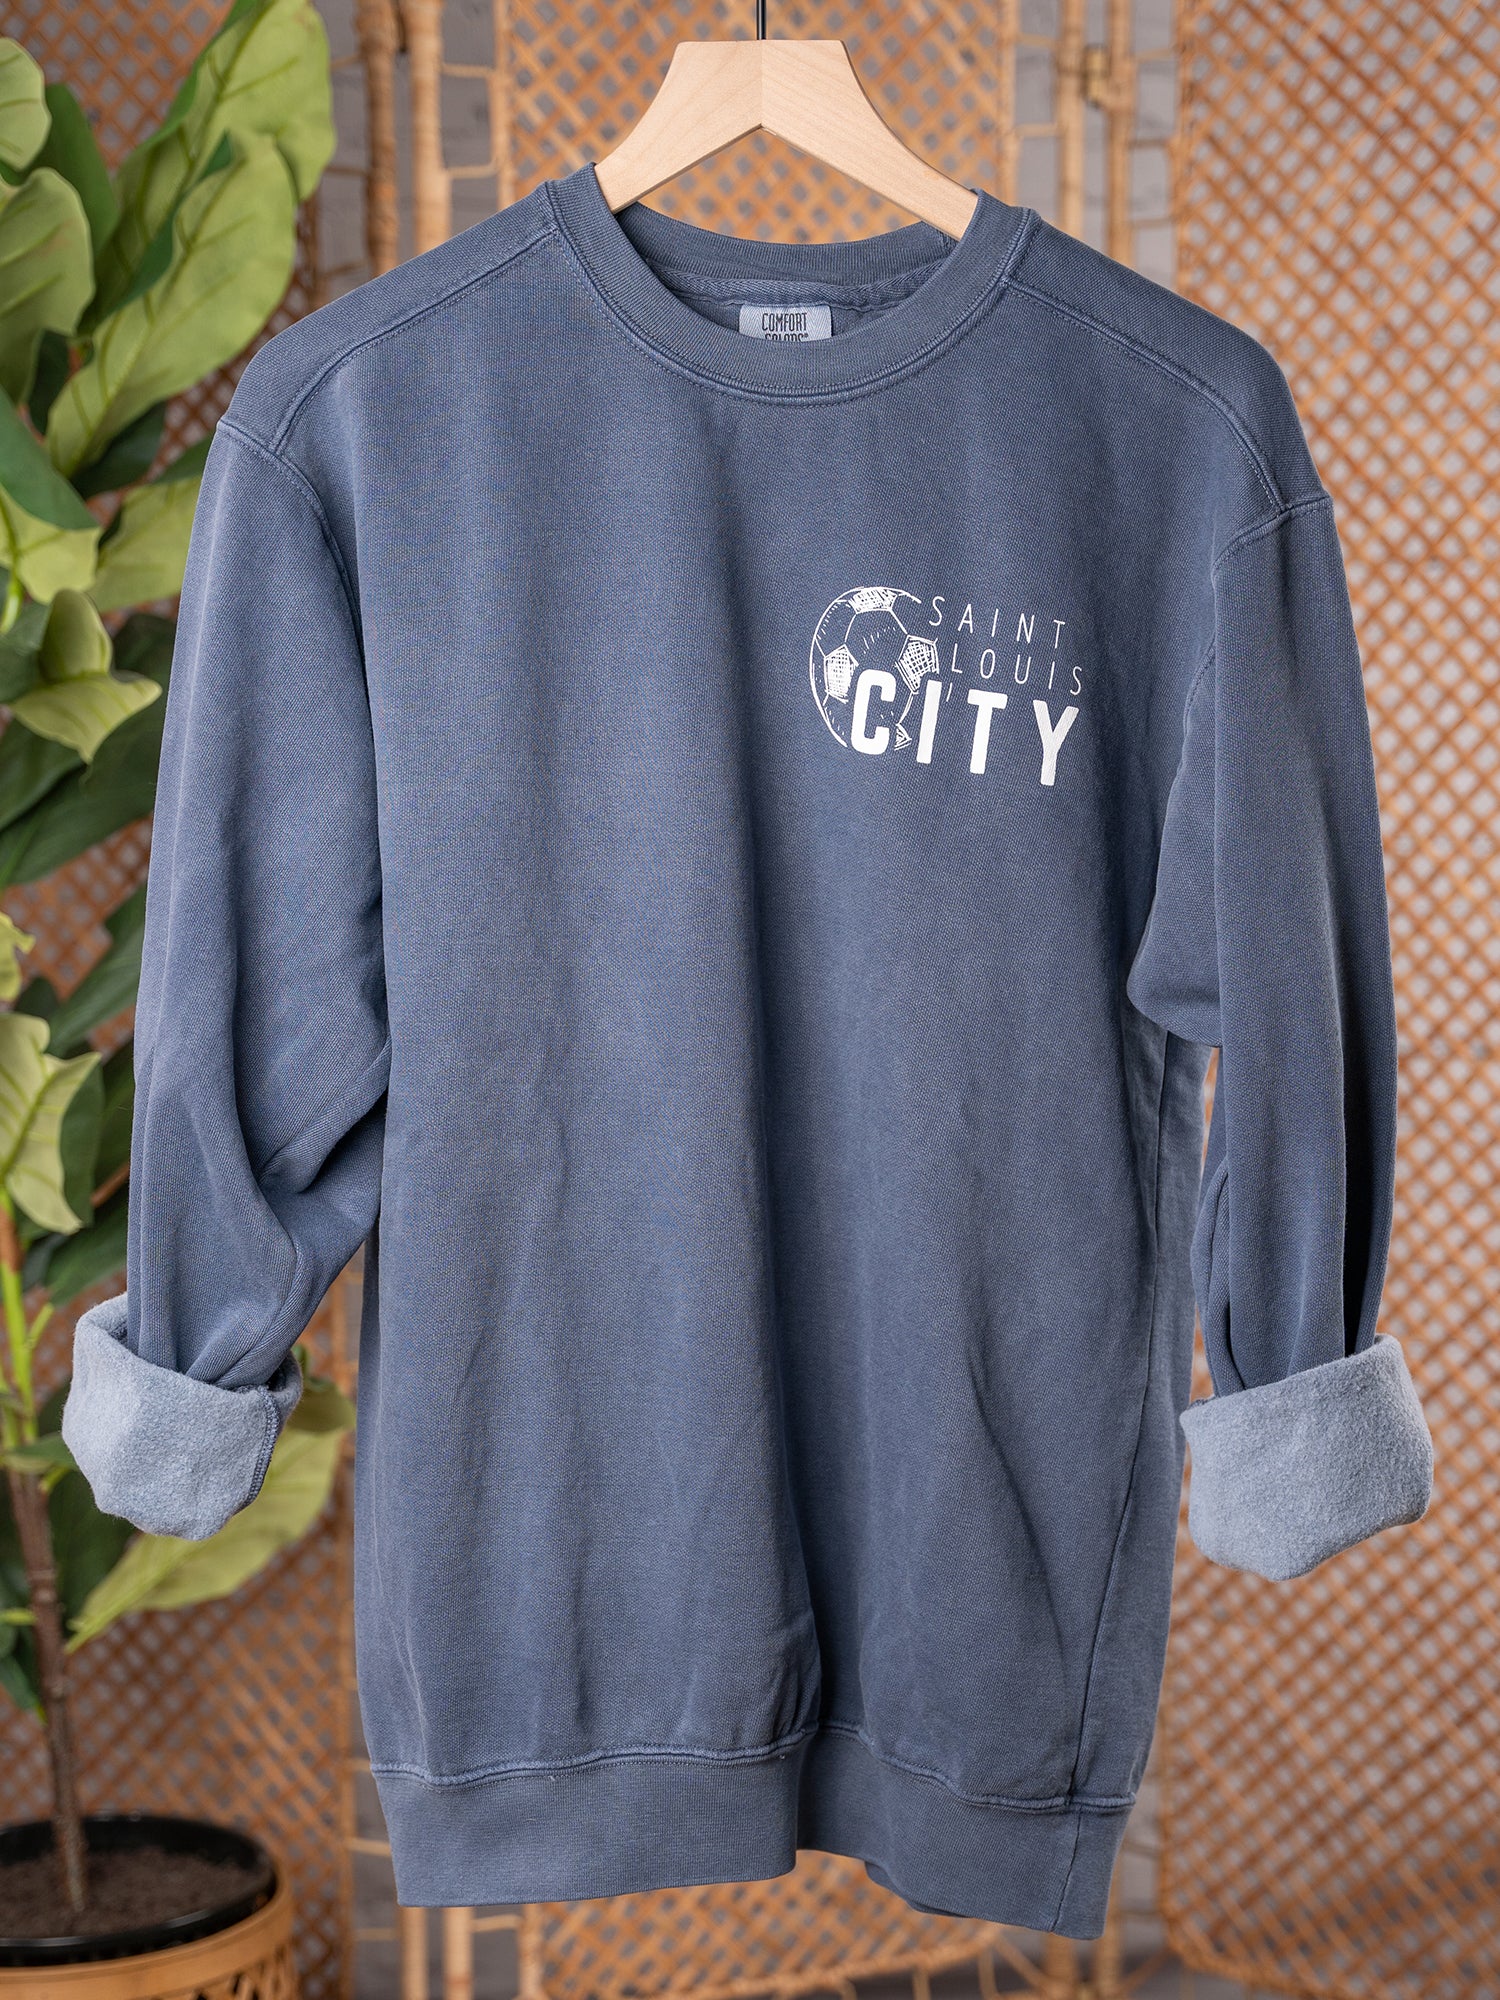 Our City T-shirt and Sweatshirt